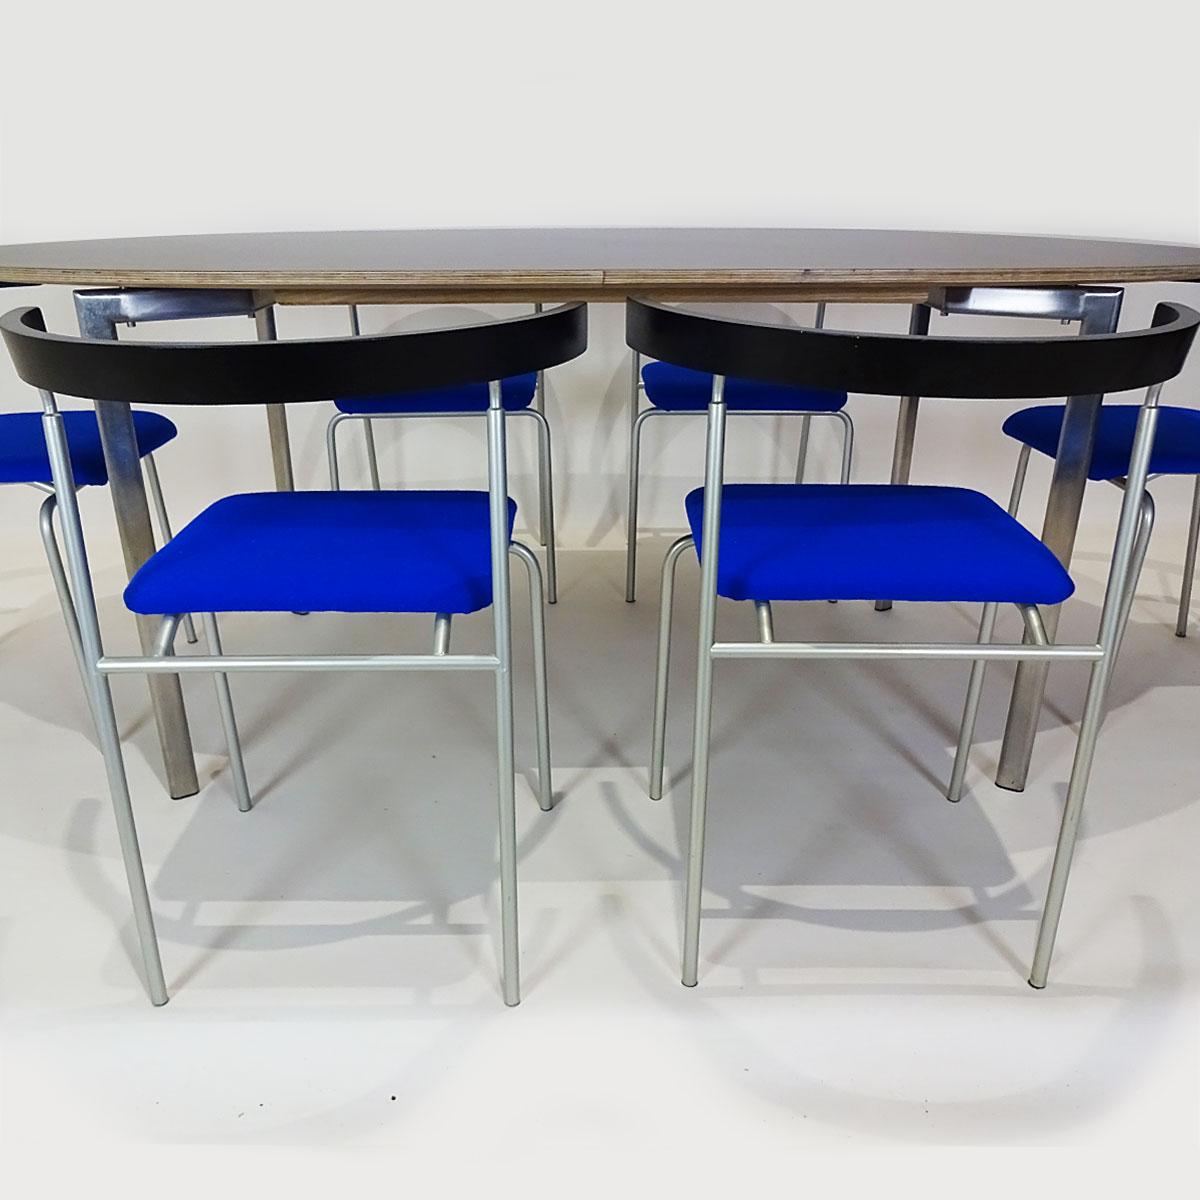 Late 20th Century Compact Vintage Danish Bentwood Dining Set in Black, Metal and Electric Blue